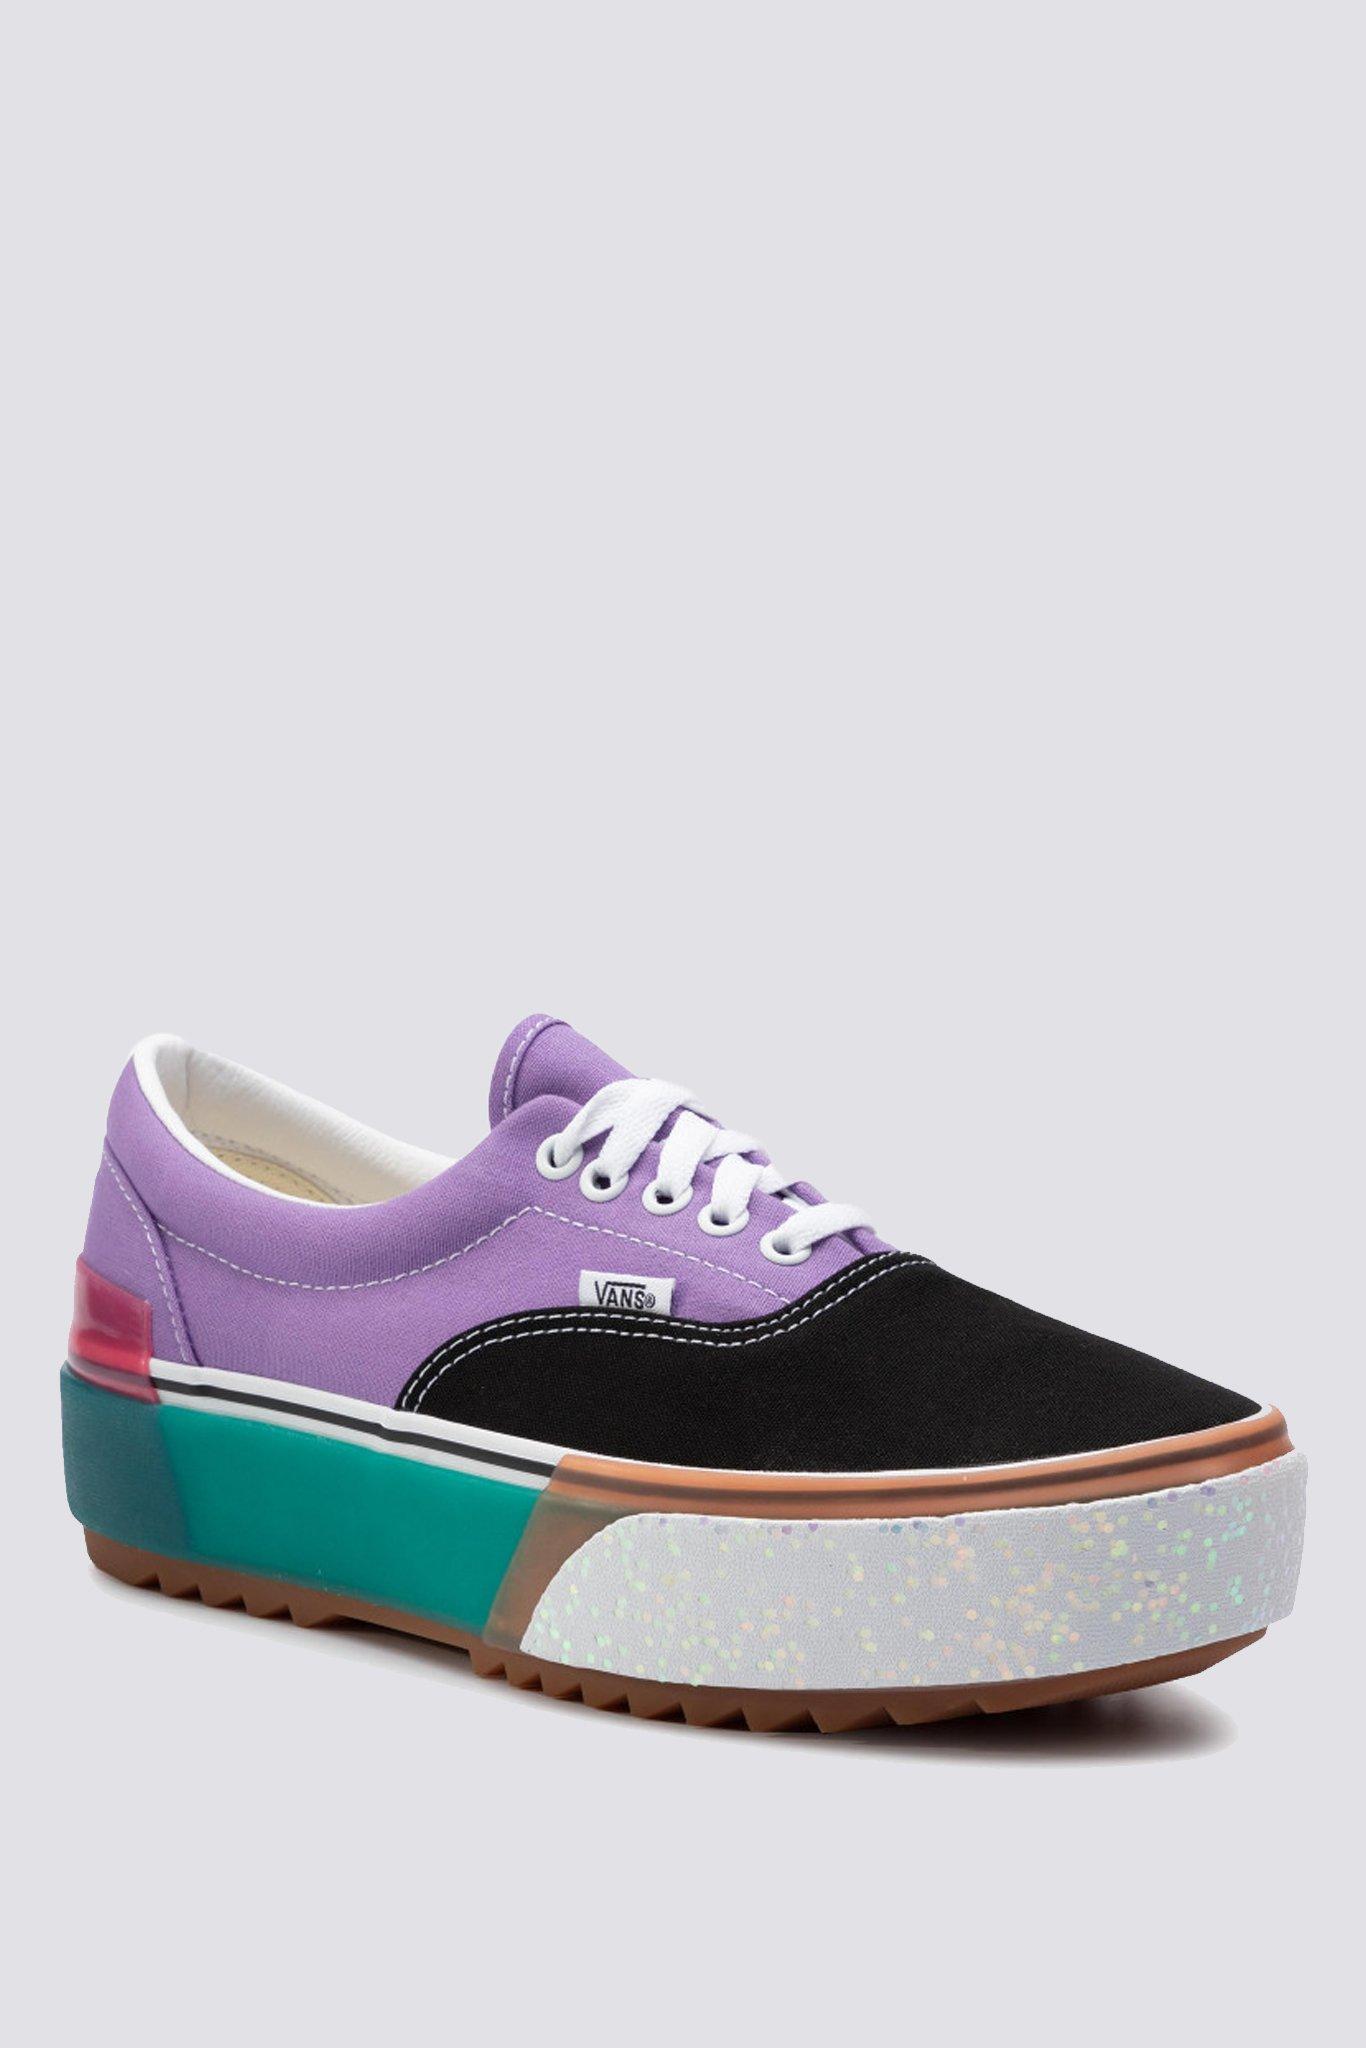 Vans Leather Era Stacked Shoes 